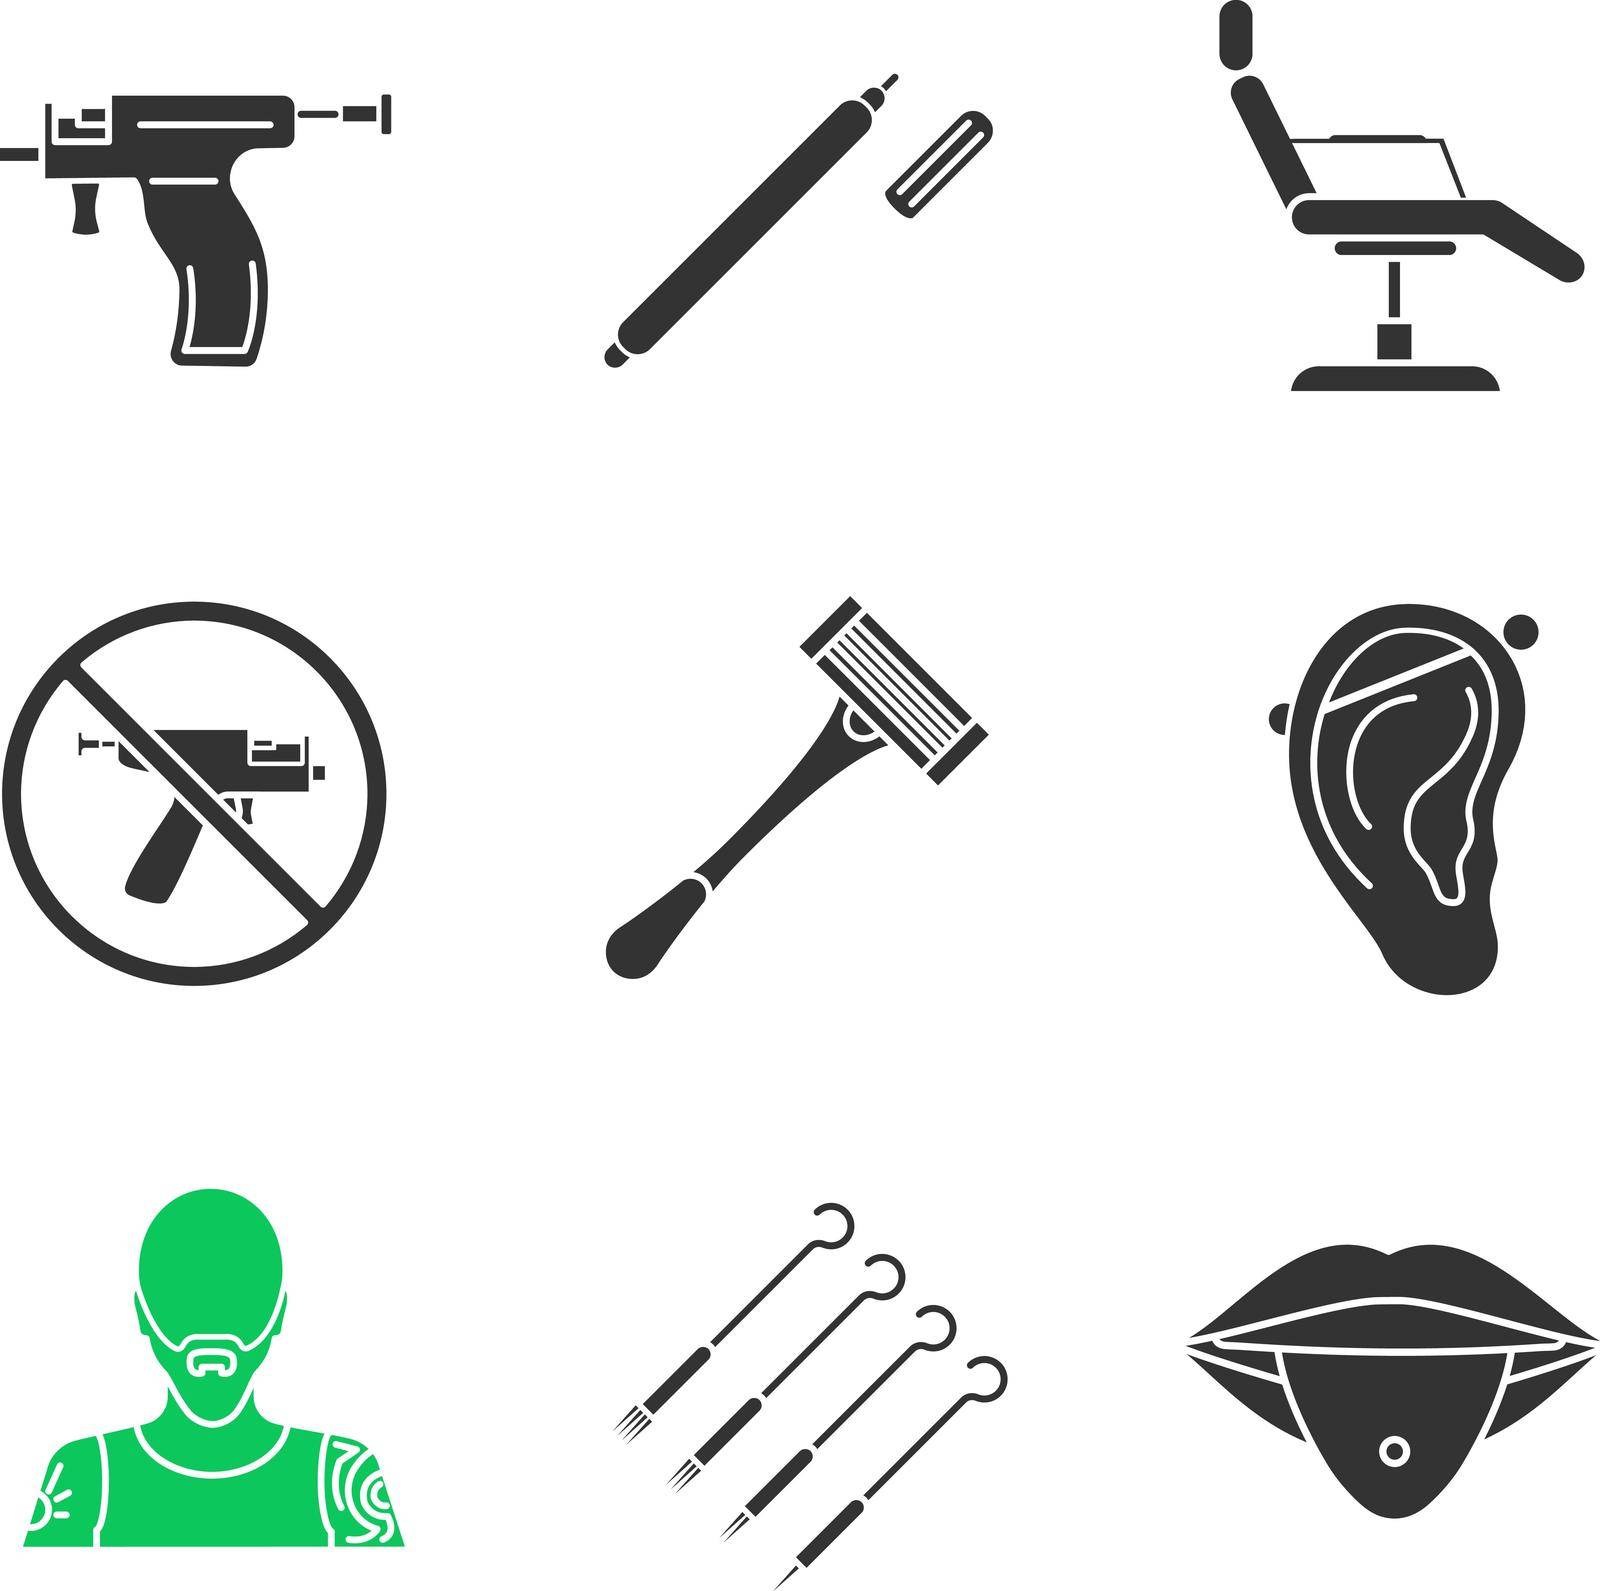 Tattoo studio glyph icons set. Highlighter, tattoo chair, piercing gun prohibition, razor, pierced ear and tongue, tattooist, ink needles pack. Silhouette symbols. Vector isolated illustration